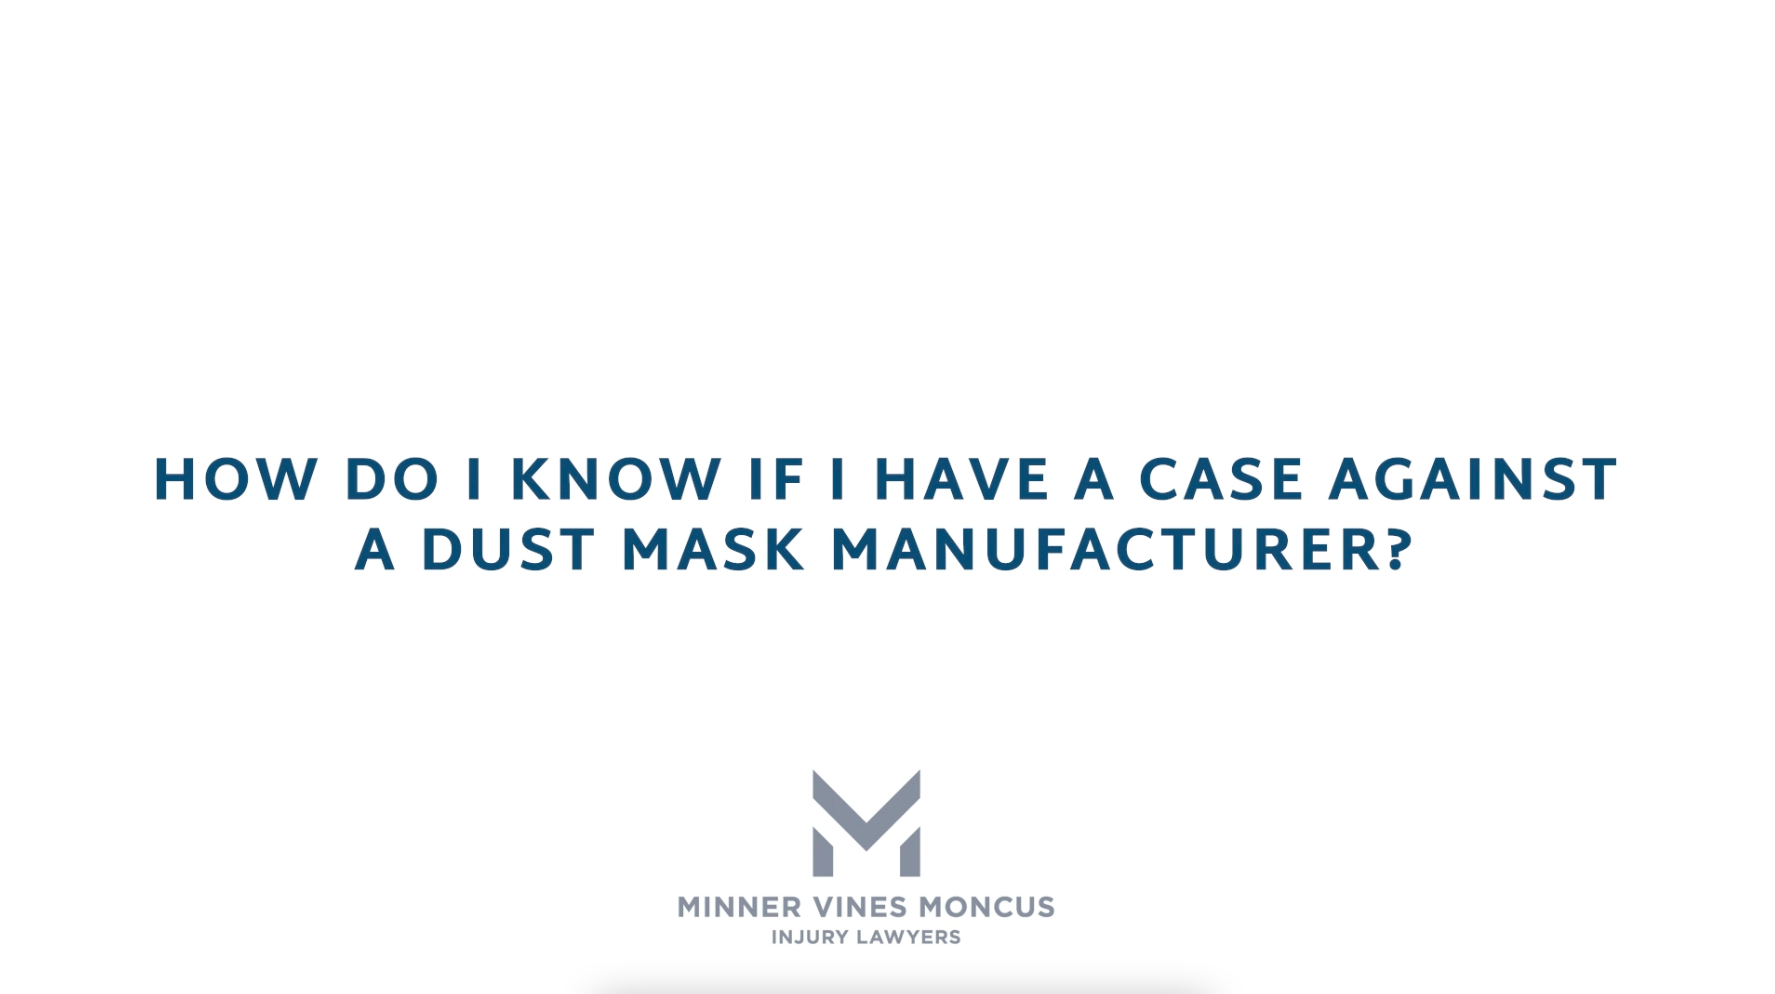 How do I know if I have a case against a dust mask manufacturer?